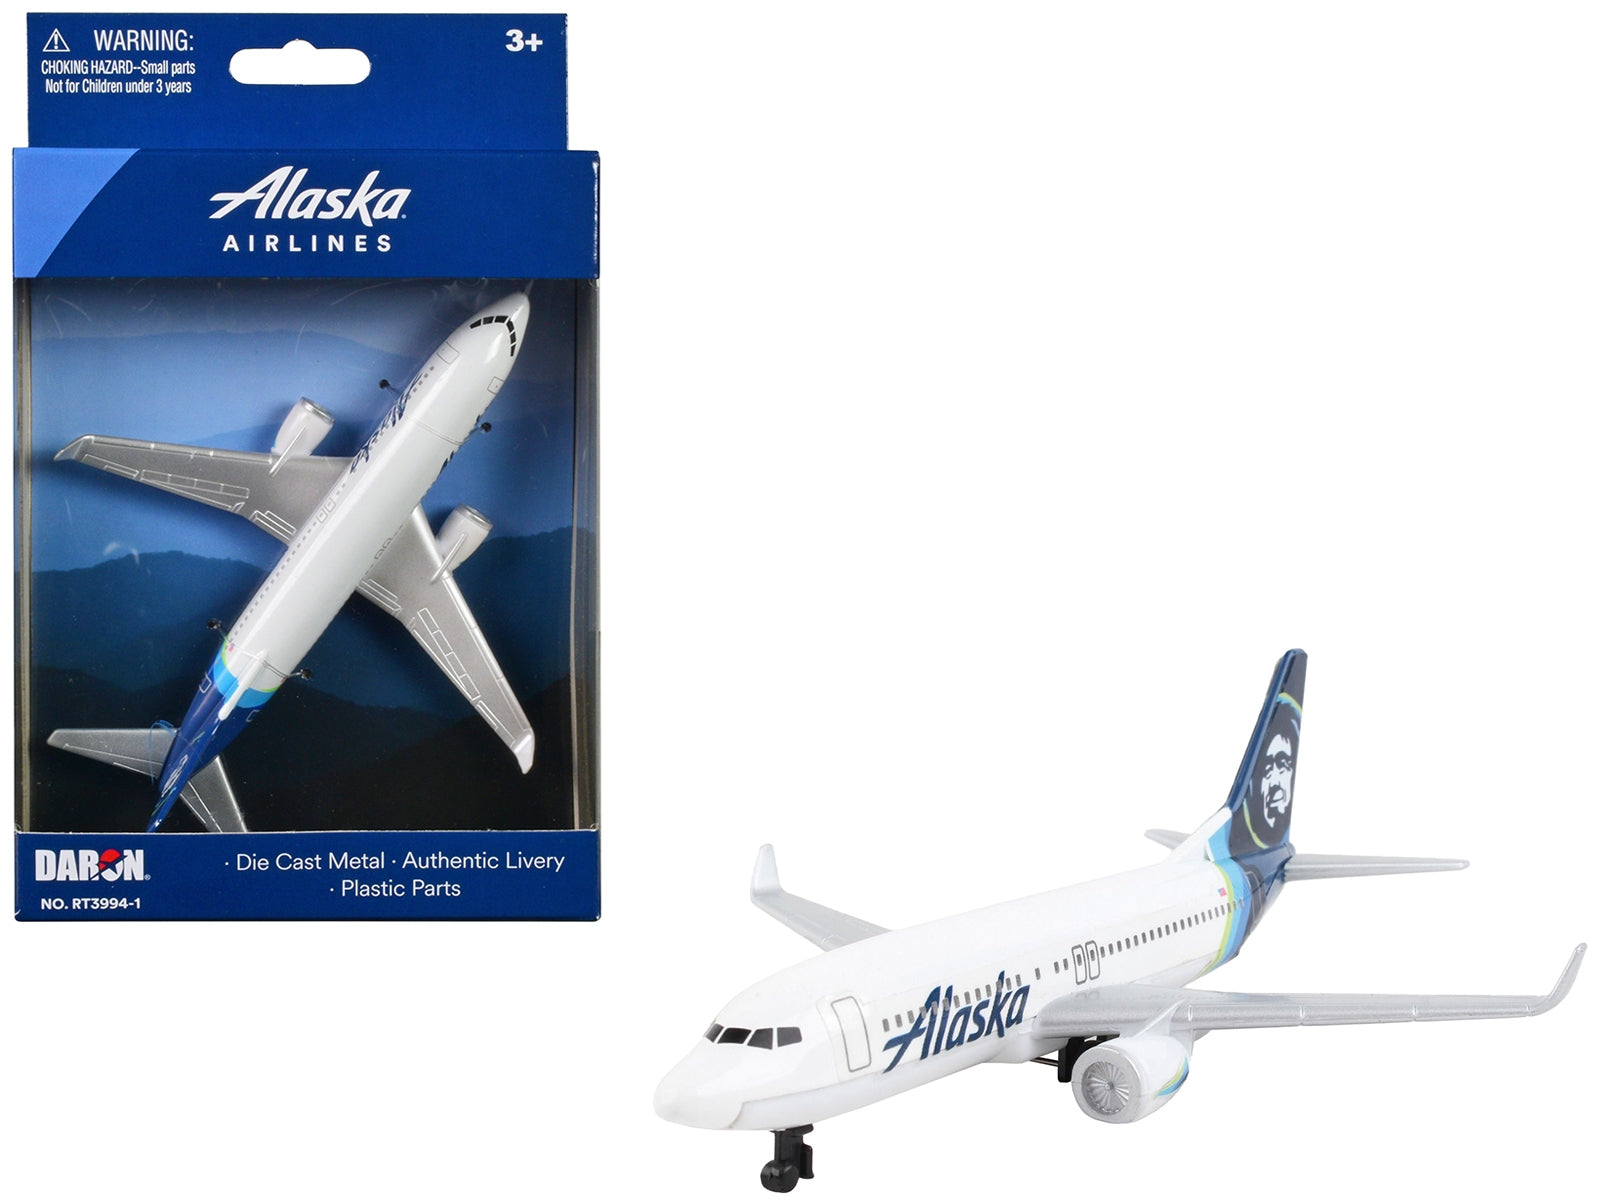 Commercial Aircraft "Alaska Airlines" White with Blue Tail Diecast Model Airplane by Daron